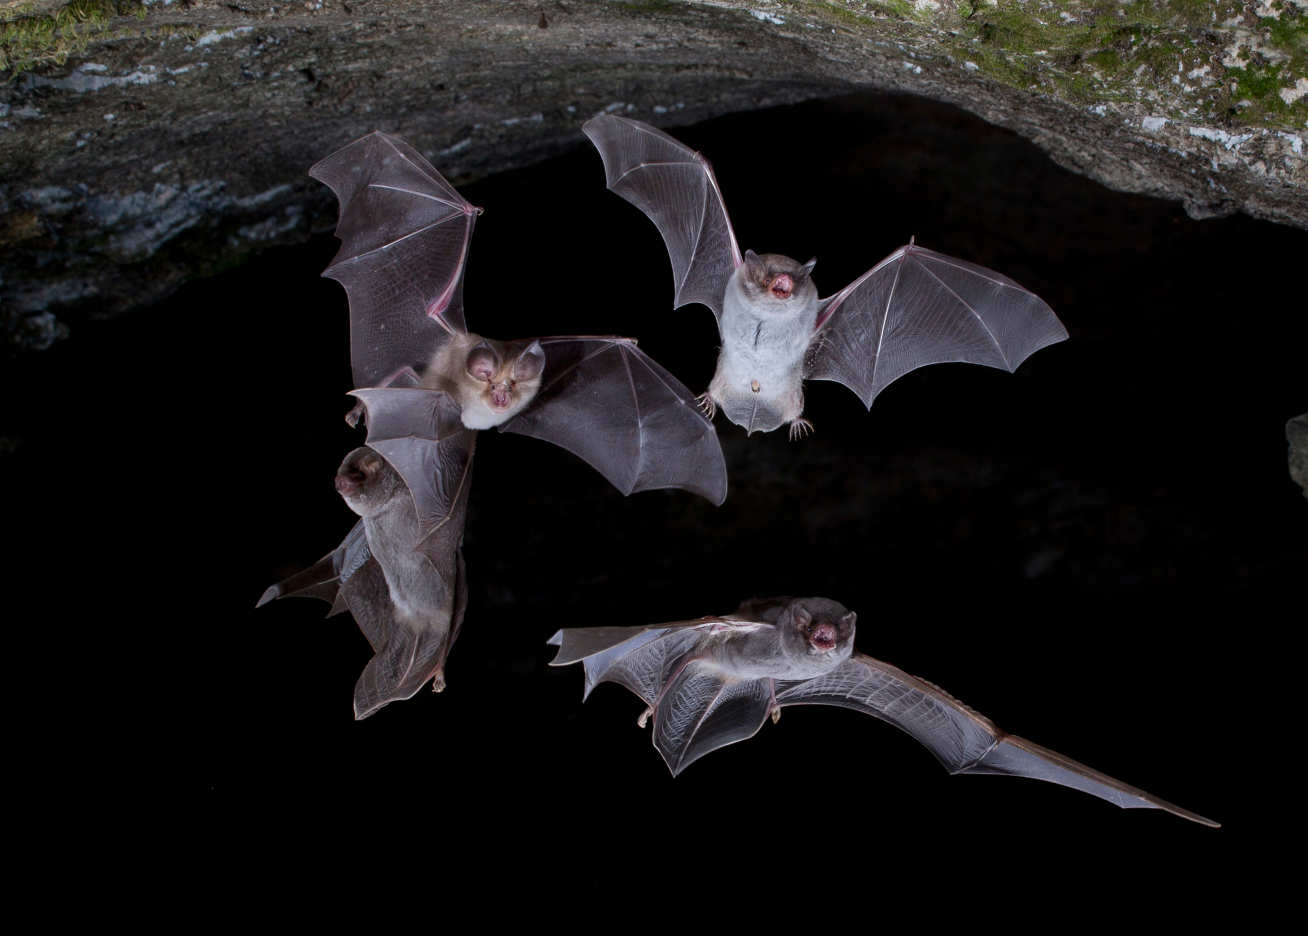 Bats flying in a cave